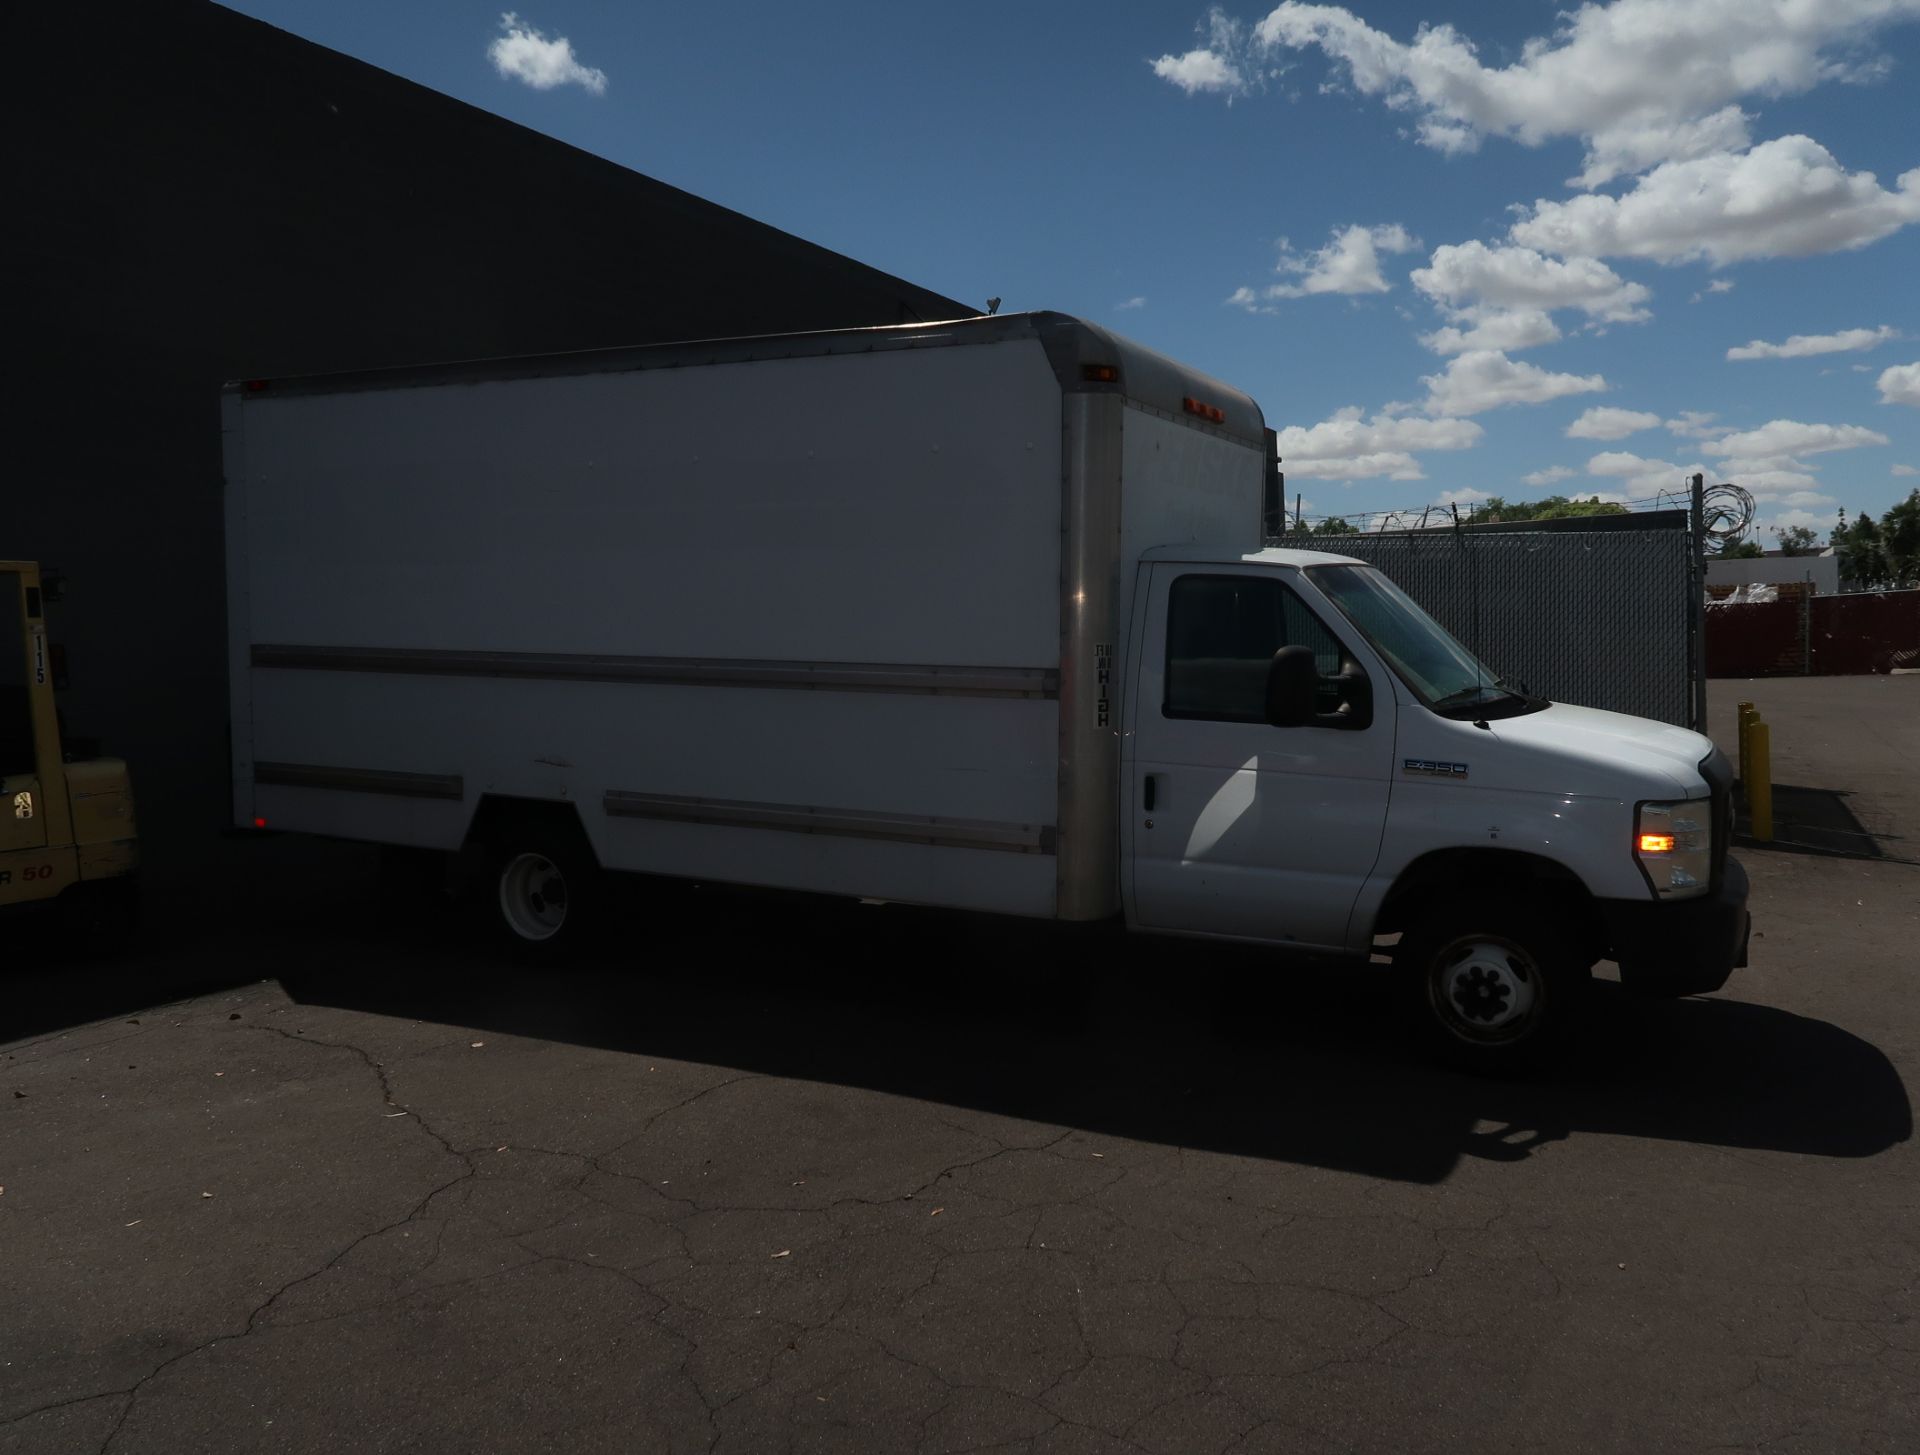 2008 FORD E-350 BOX VAN (TRUCK RUNS AND DRIVES, MORE INFO AVAILABLE SOON) - Image 2 of 7